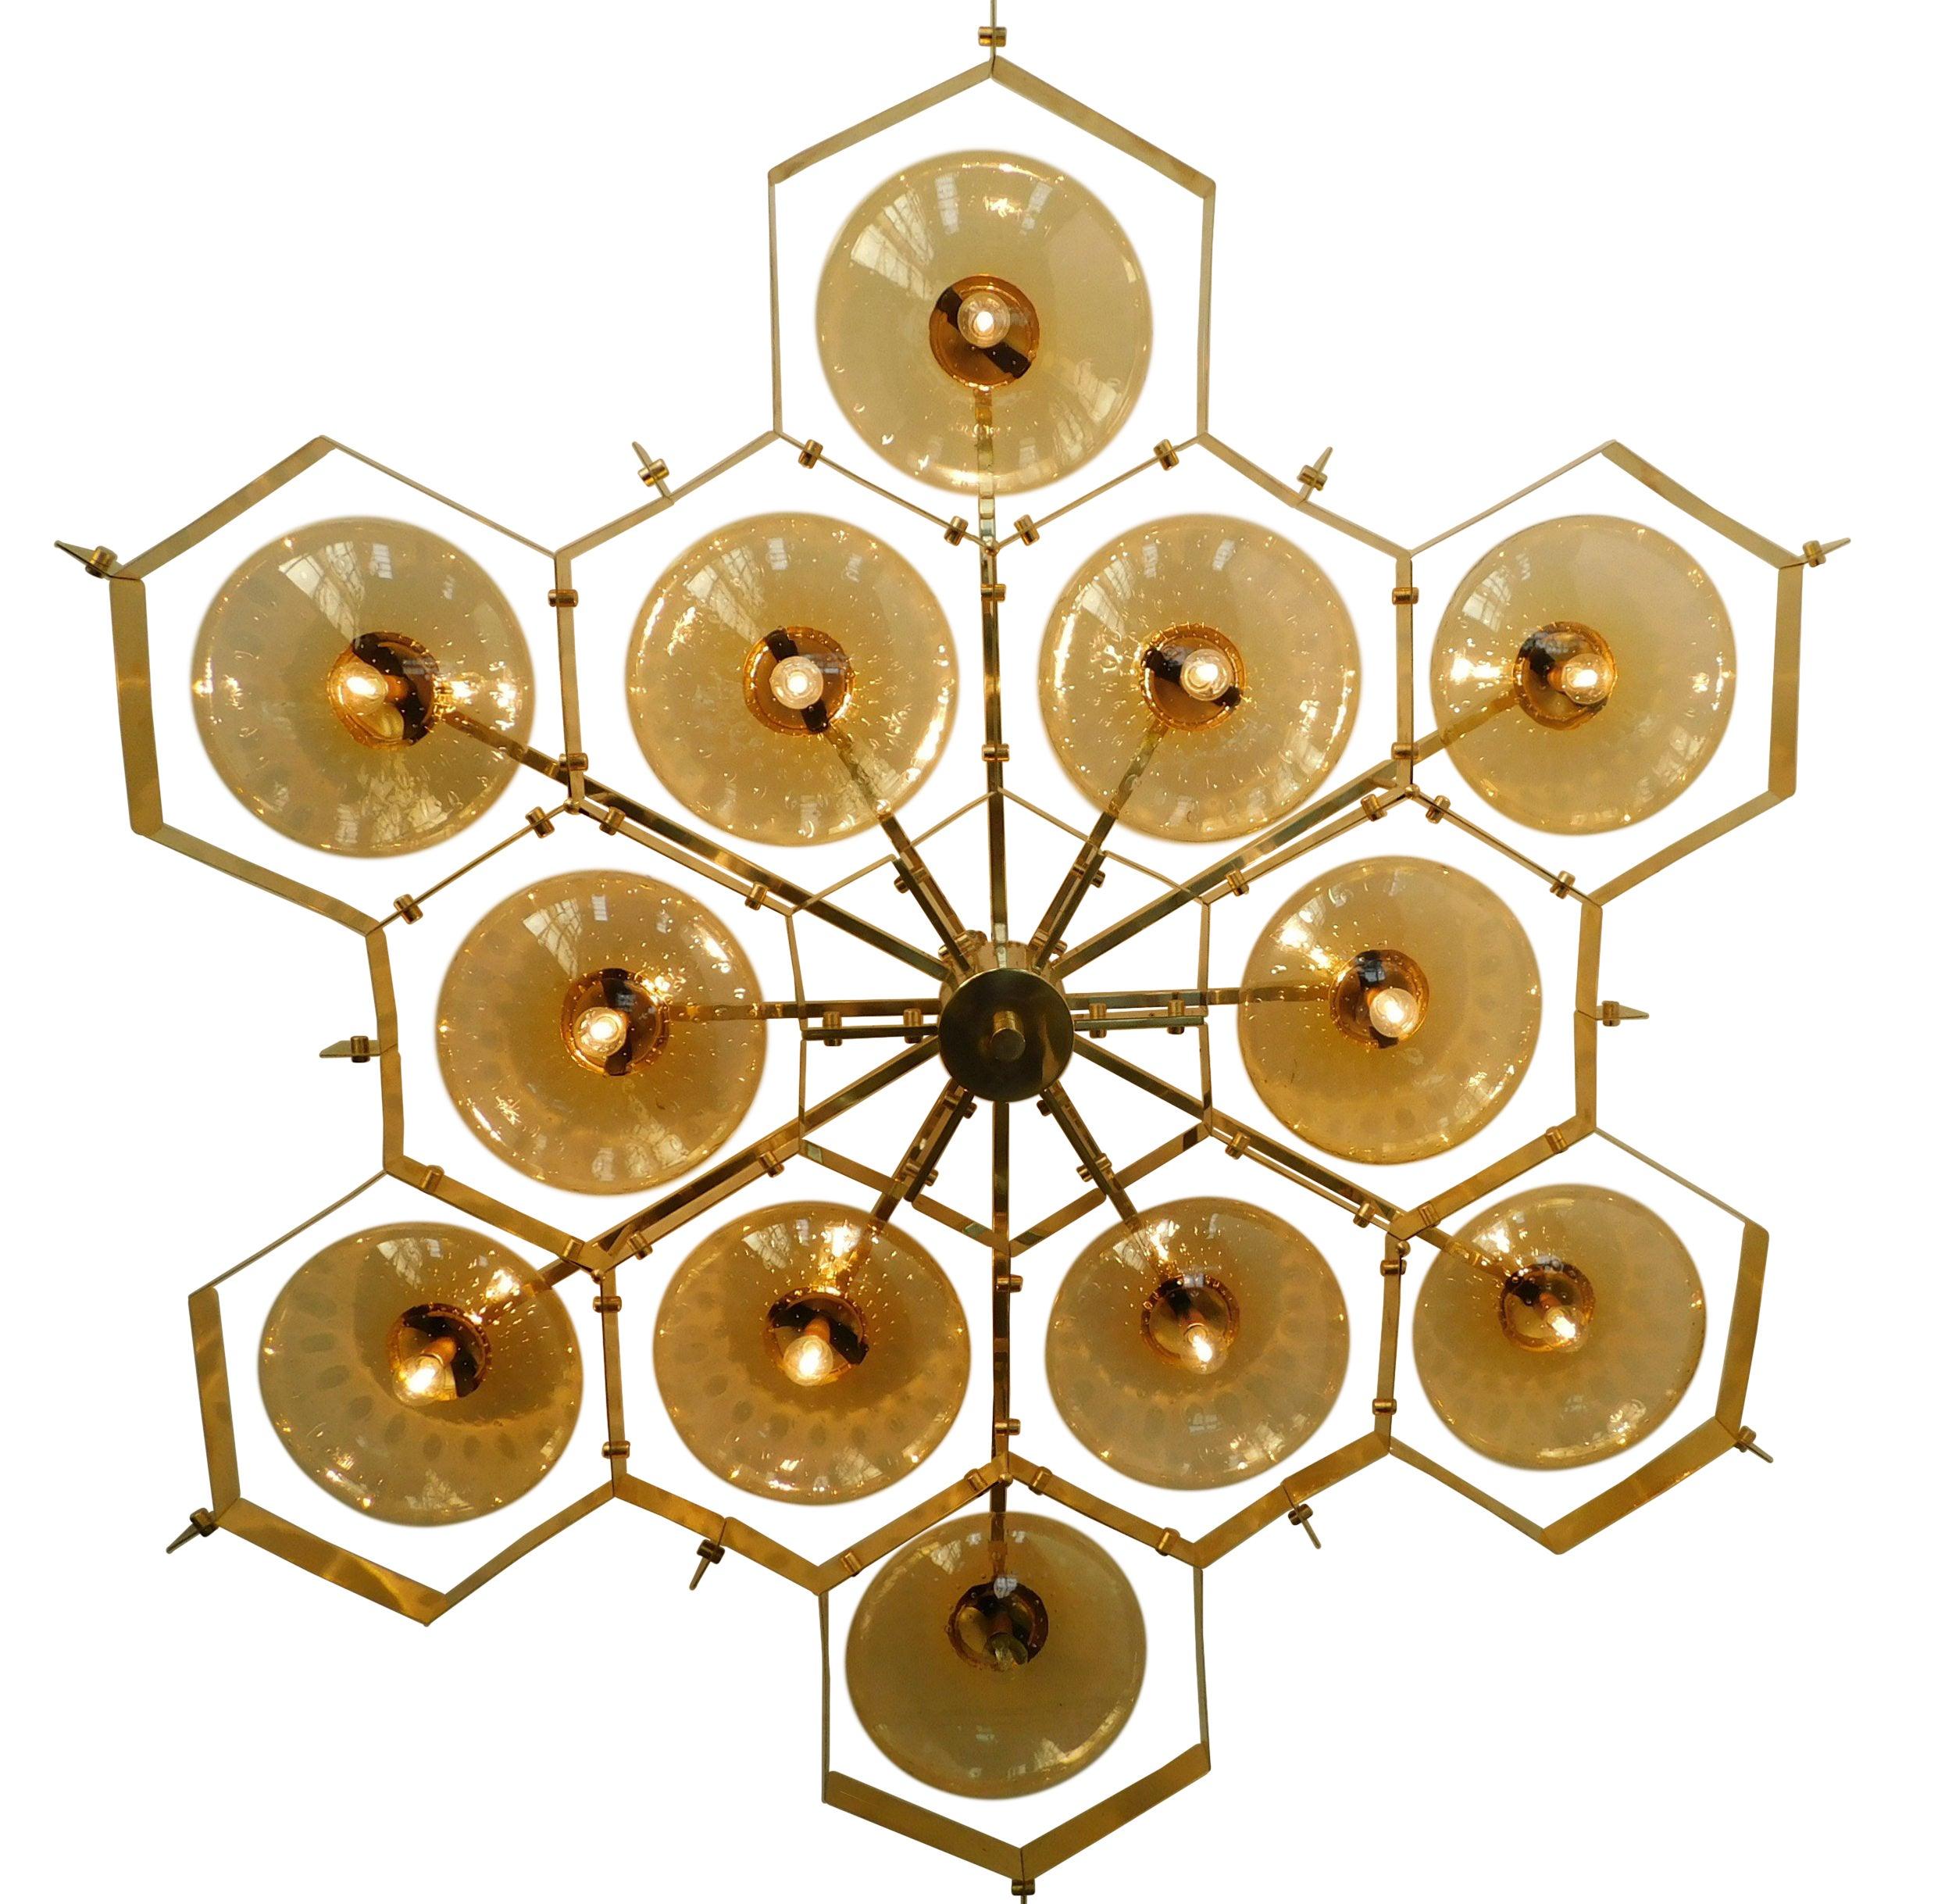 Italian flush mount with Murano glass shades mounted on solid brass frame / Made in Italy
Designed by Fabio Ltd, inspired by Angelo Lelli and Arredoluce styles
12 light / E12 or E14 type / max 40W each
Measures: Diameter 74 inches, height 10